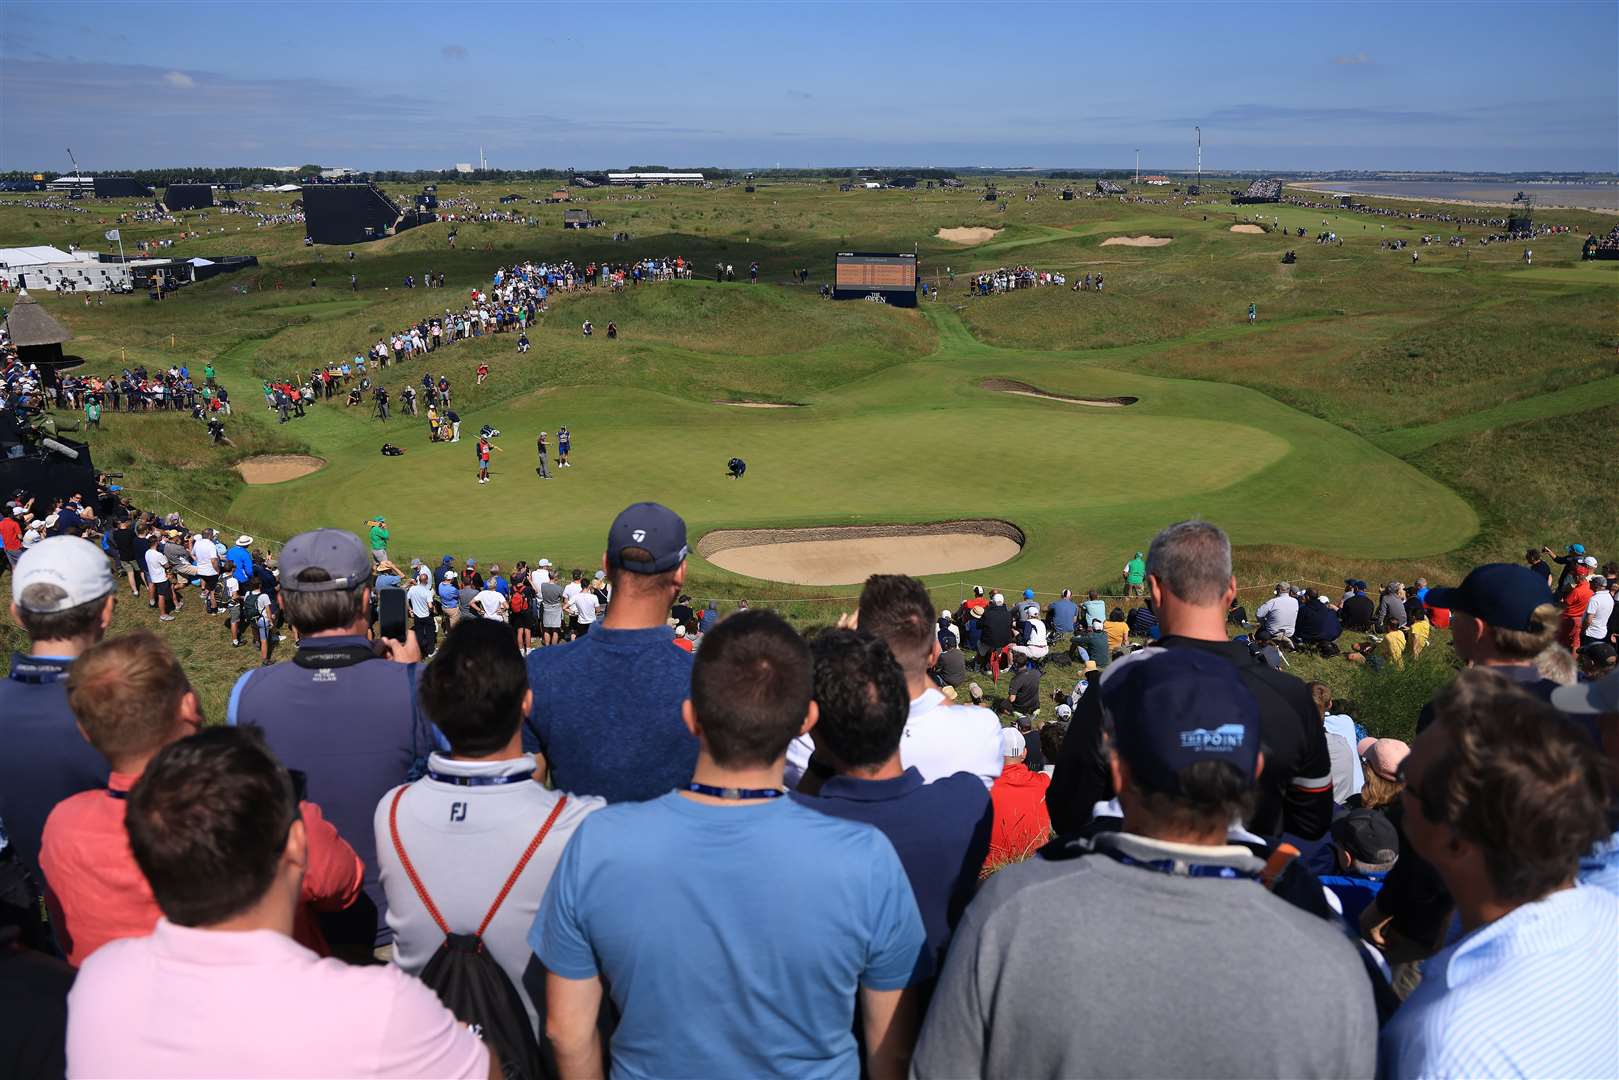 Jordan Speith, from US, putts on the 6th green at The 149th Open at Royal St George's in Sandwich. Picture: Matthew Lewis/R&A/R&A via Getty Images